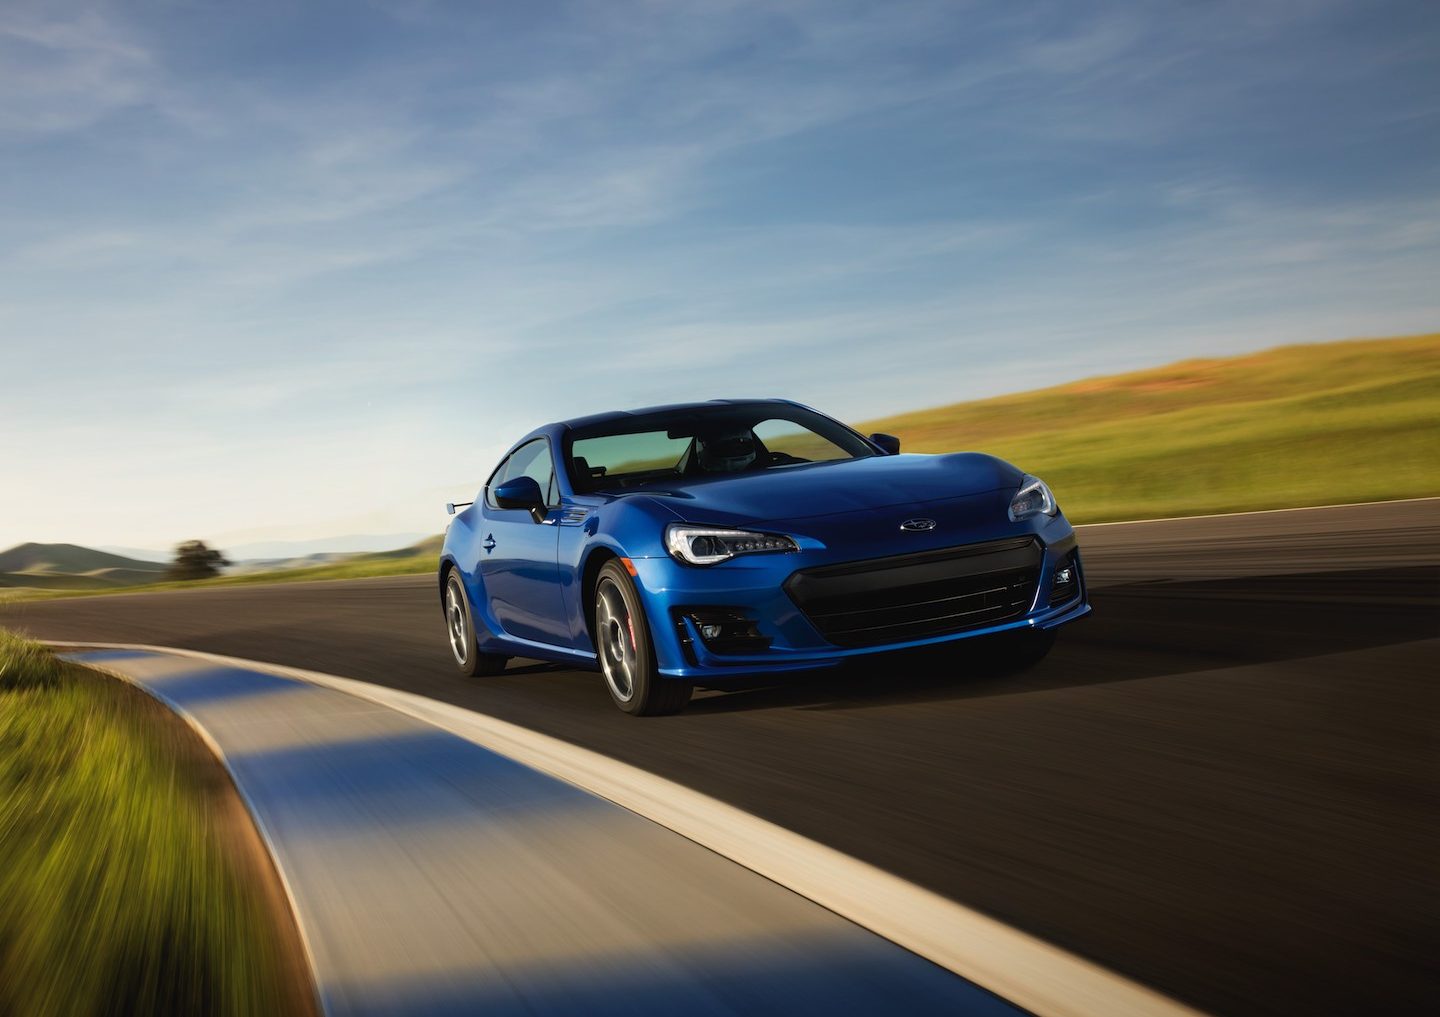 The Subaru BRZ is a lightweight rear-wheel-drive sports car with 205 hp and a manual transmission.